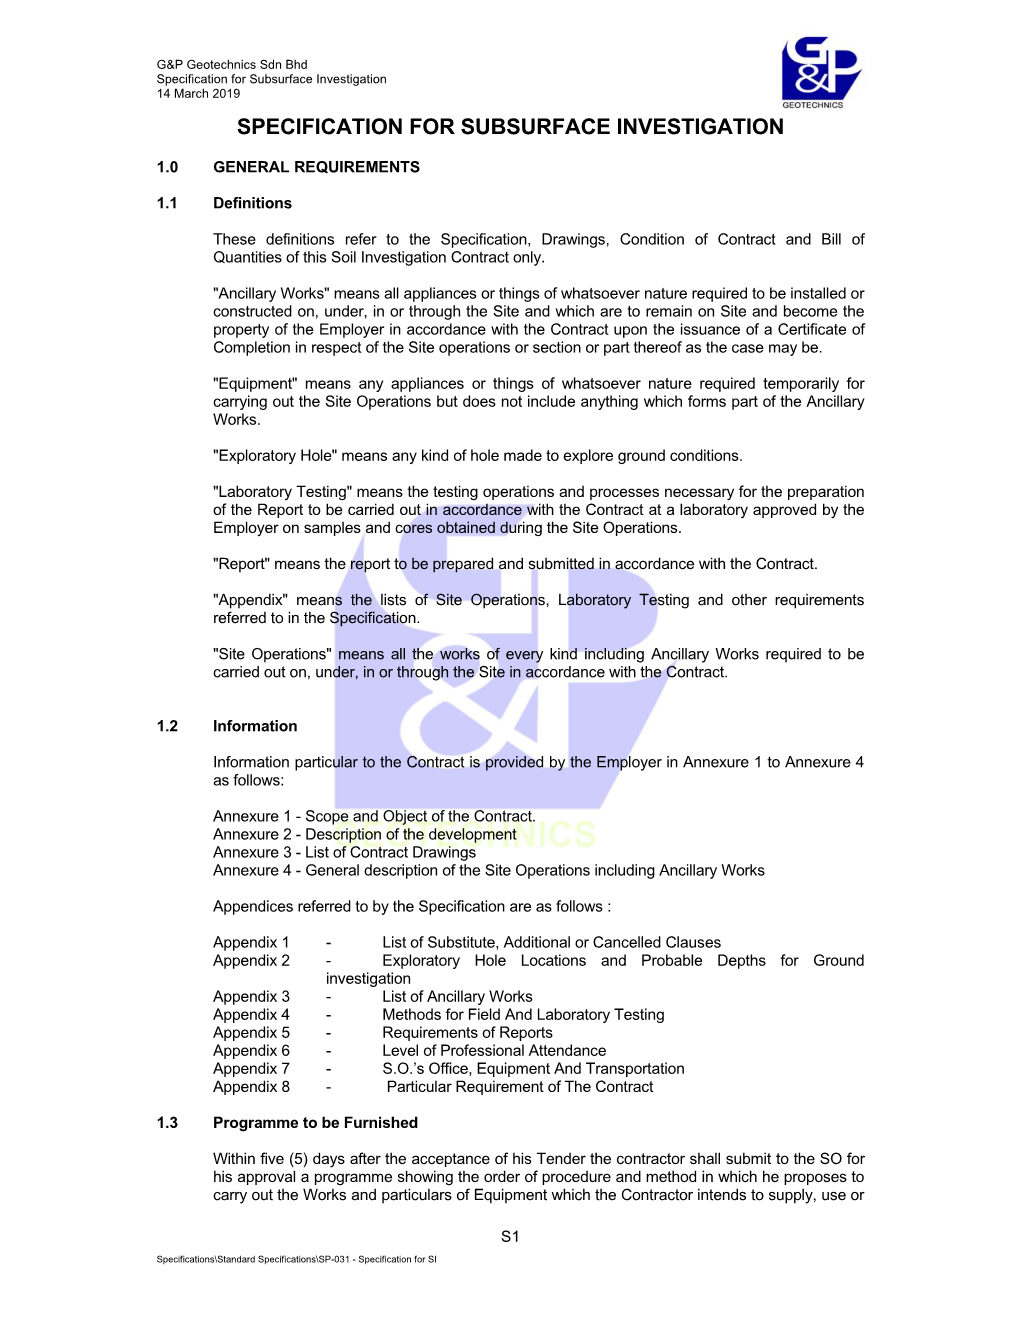 Specification for Subsurface Investigation 14 March 2019